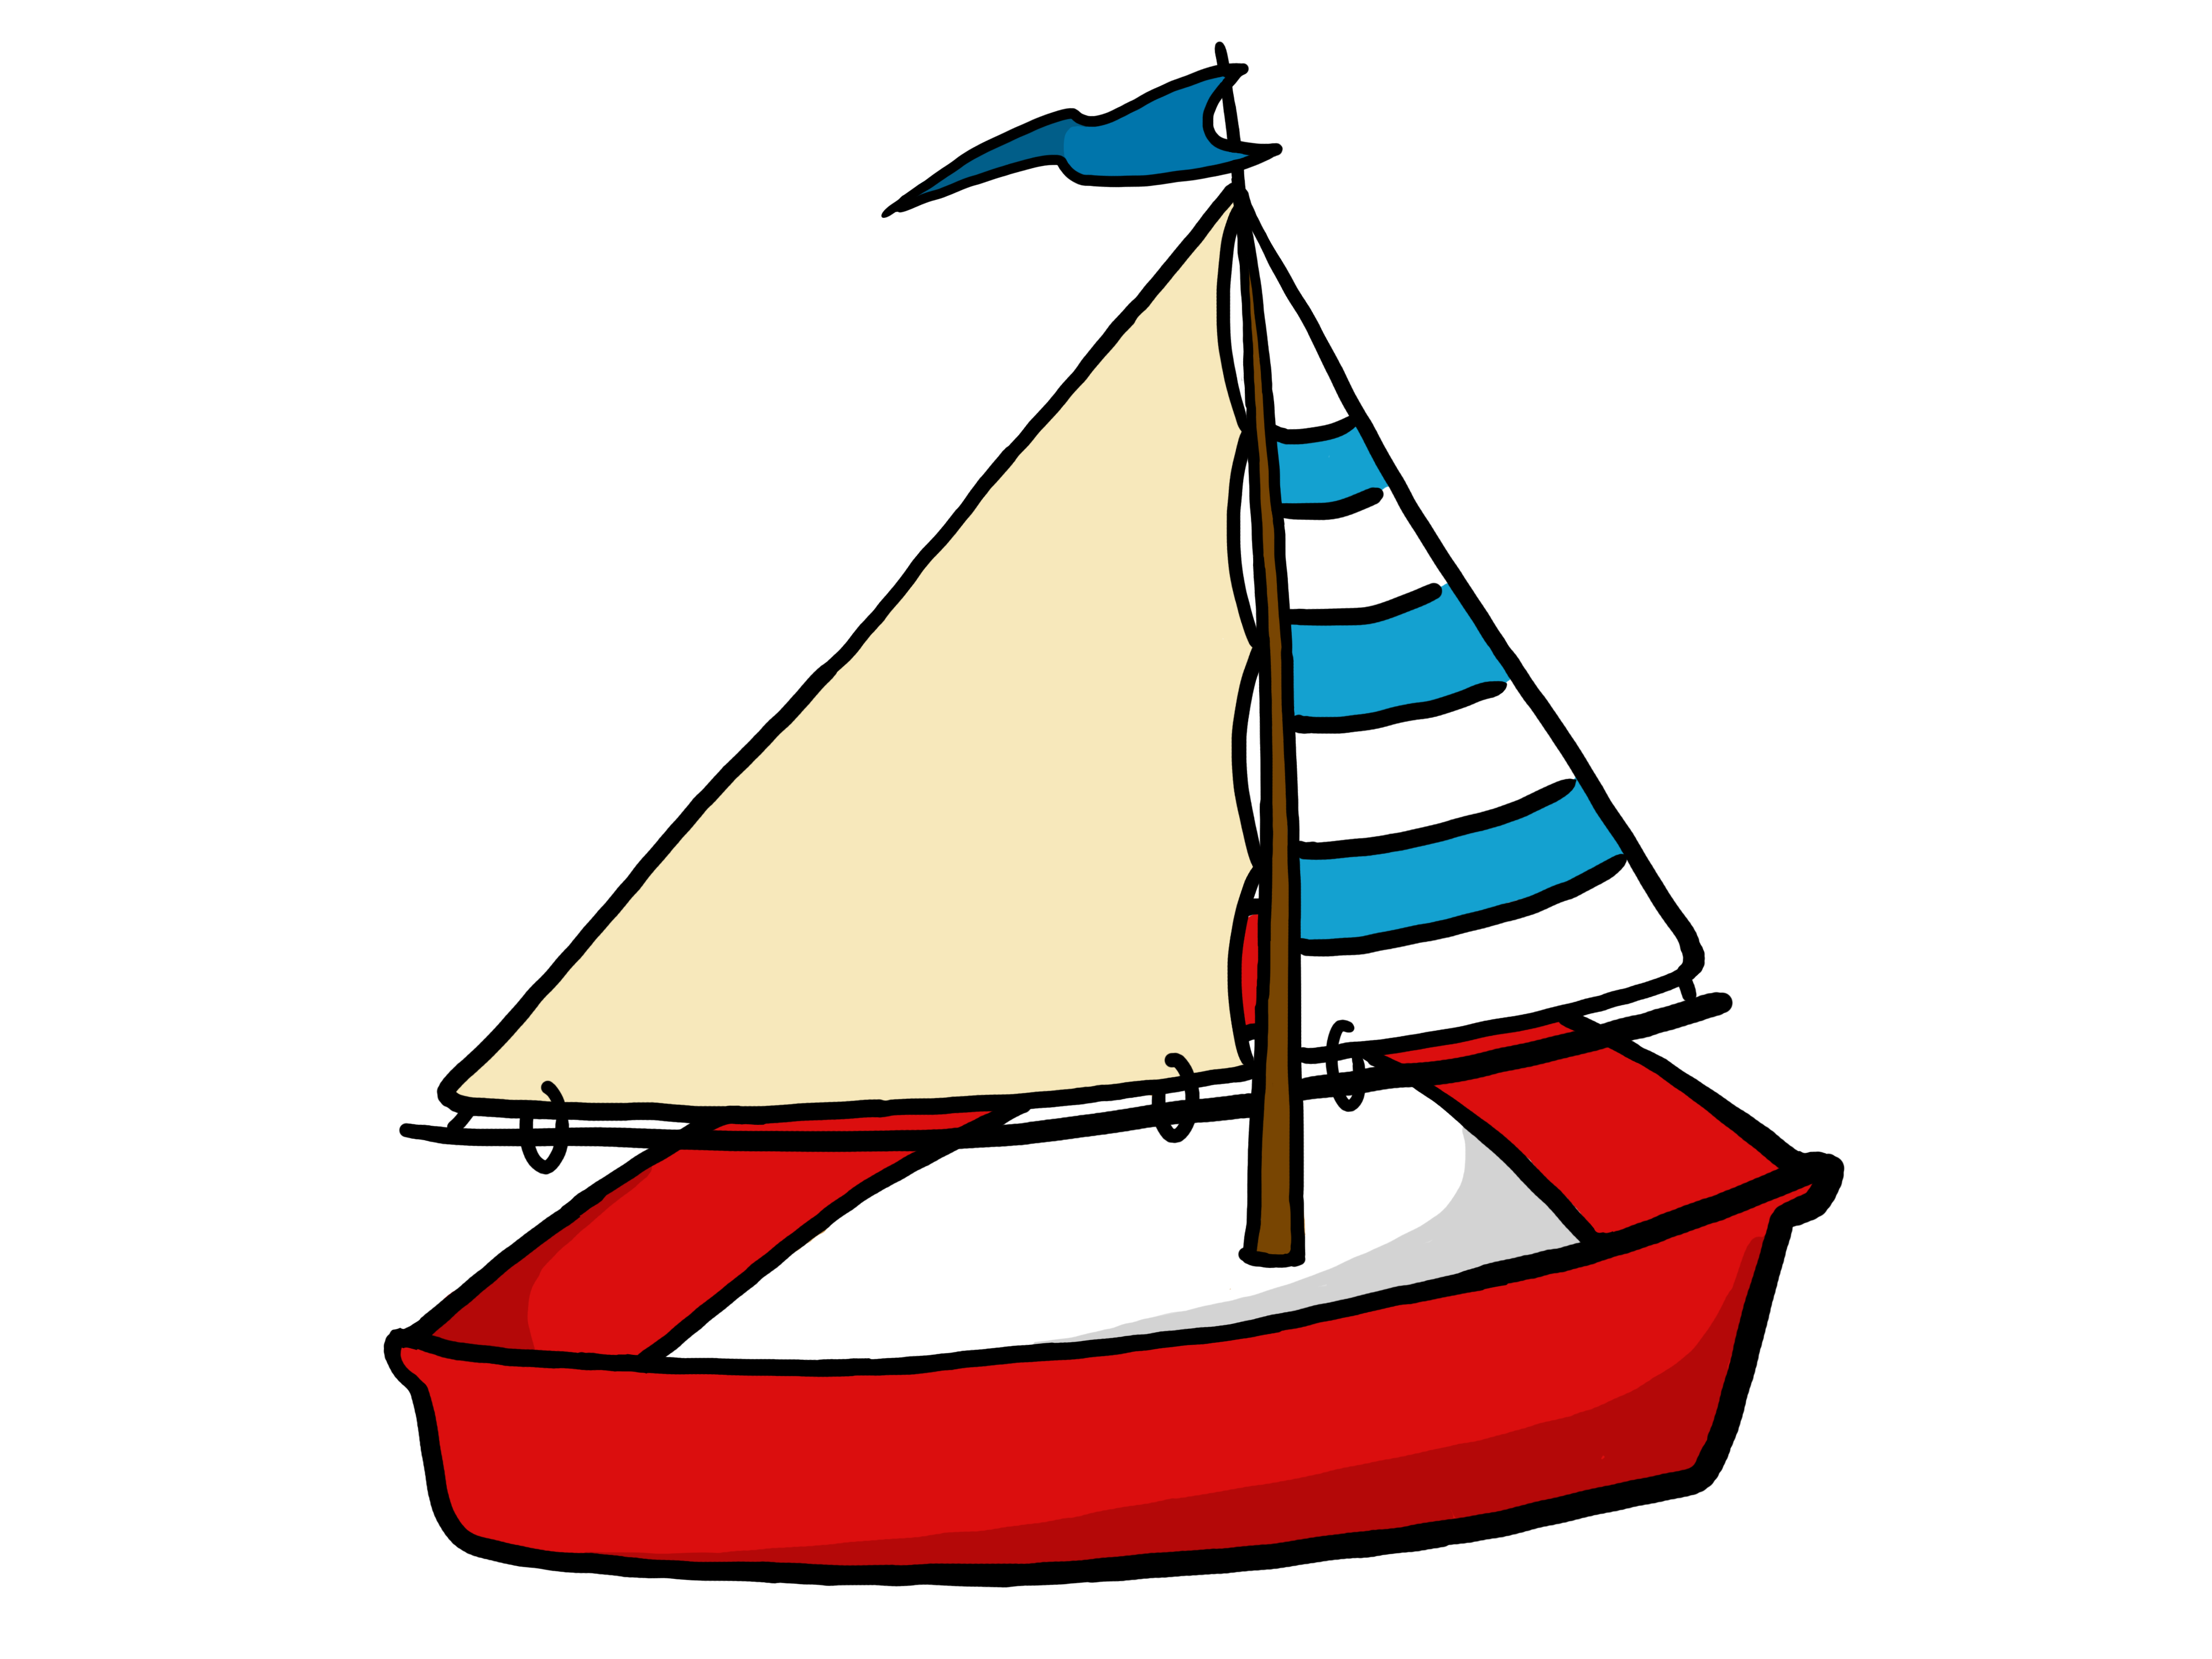 Clipart Of Sail Boat - ClipArt Best